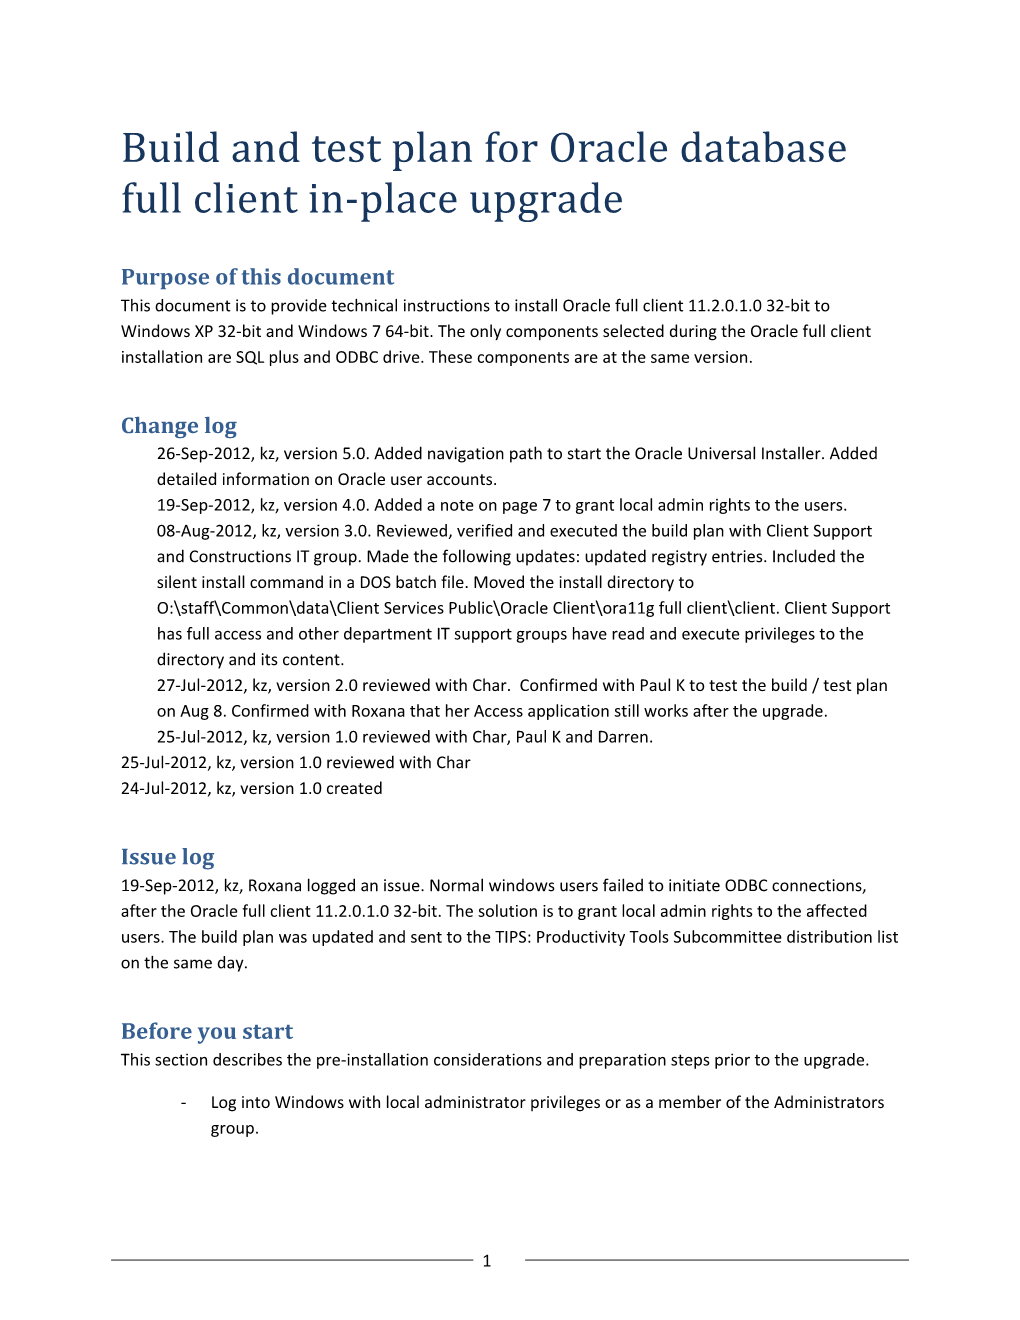 Build and Test Plan for Oracle Database Full Client In-Place Upgrade